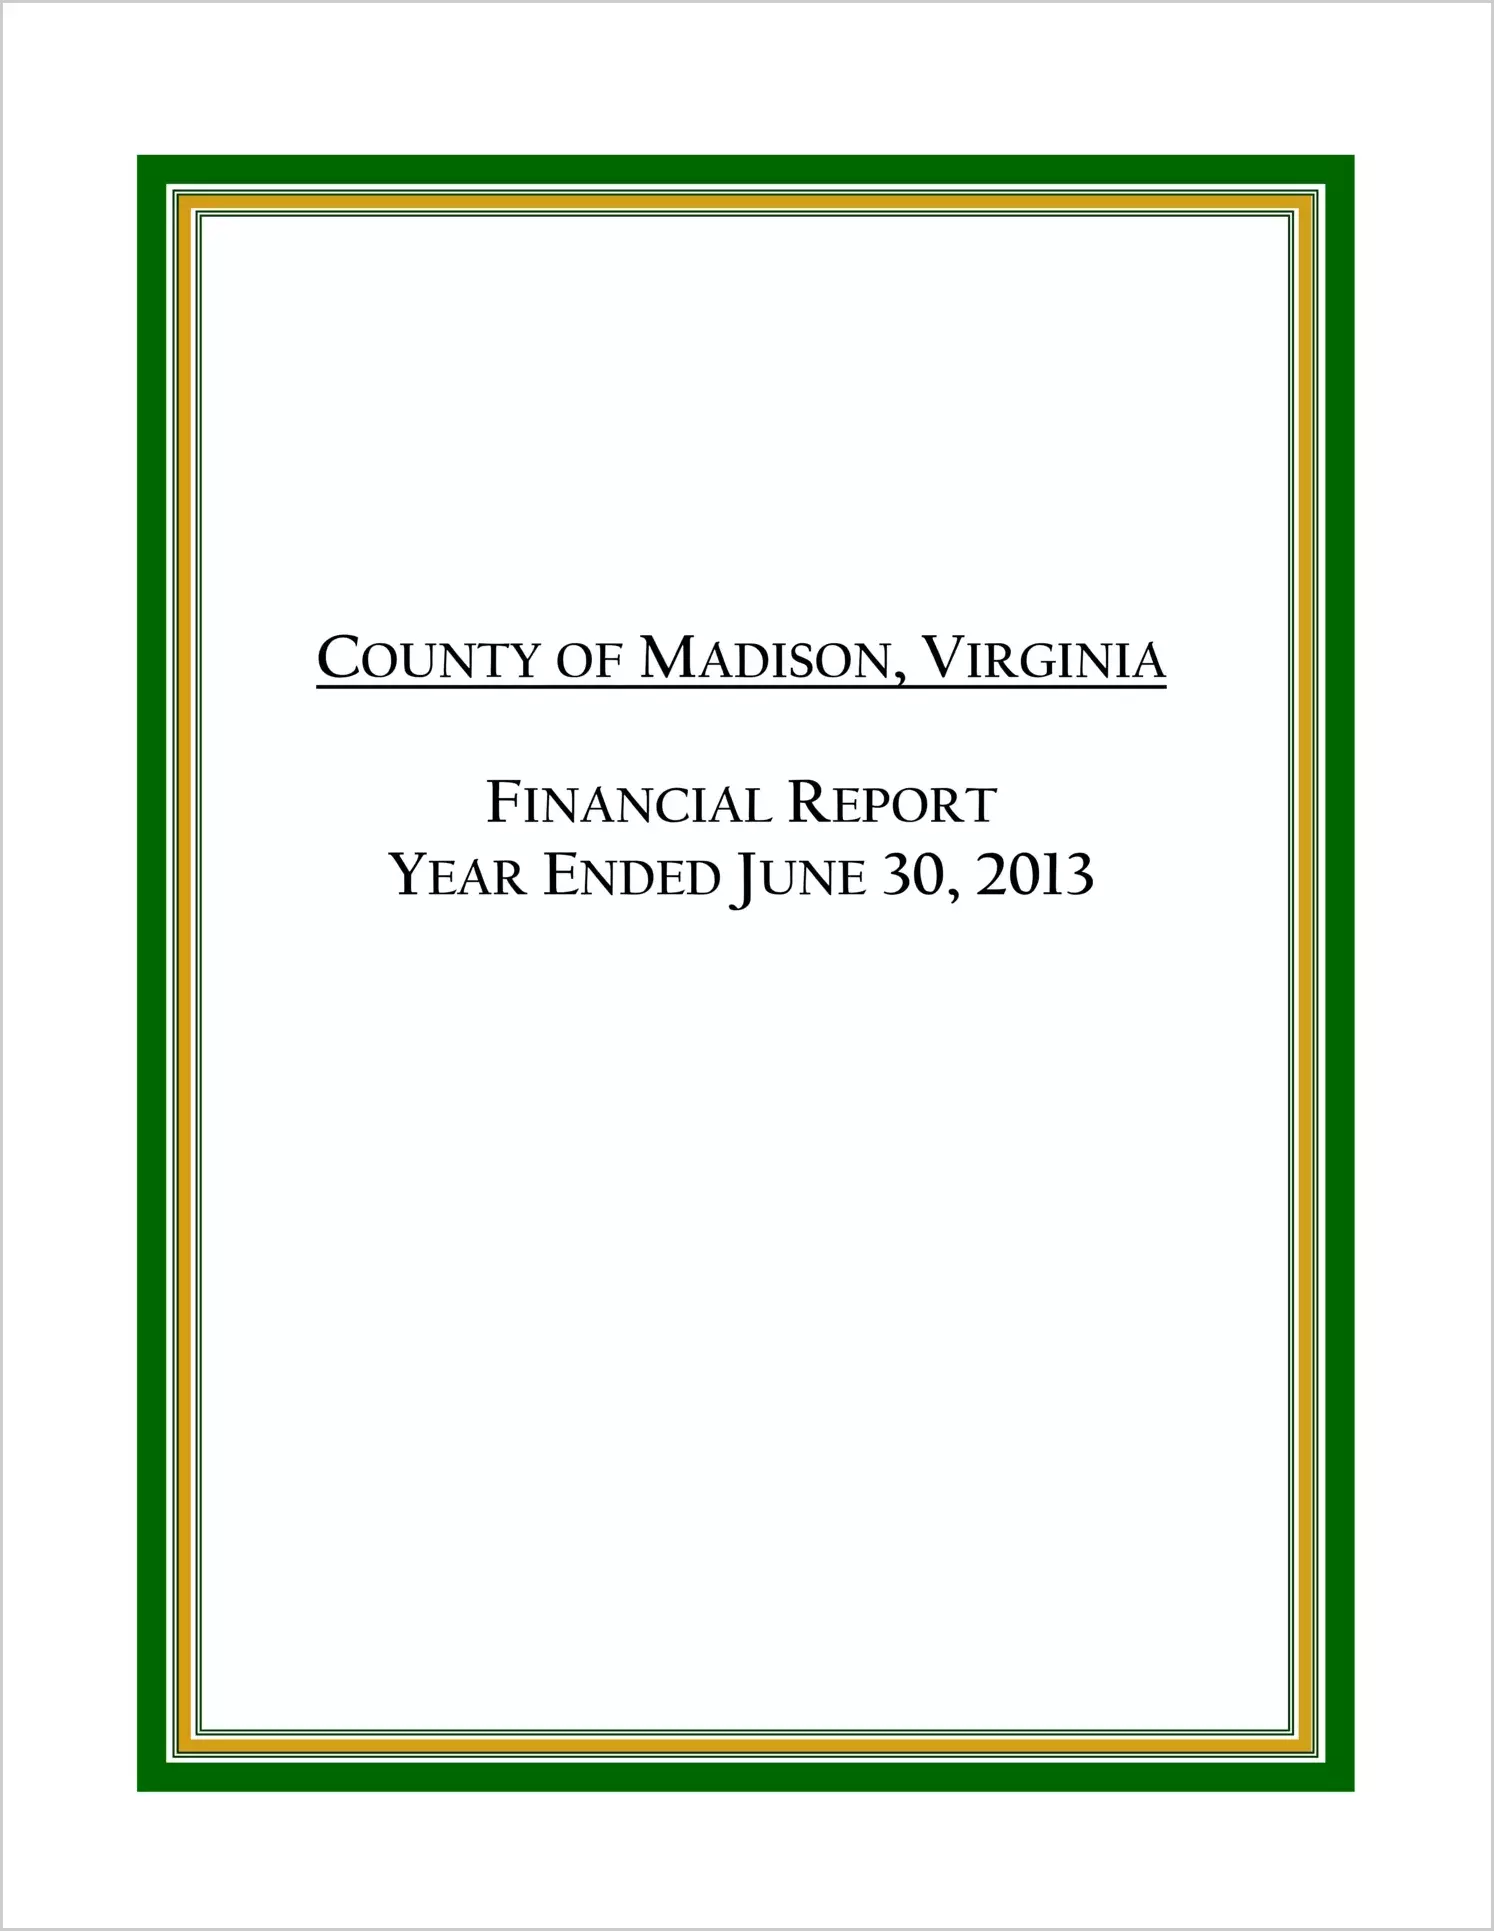 2013 Annual Financial Report for County of Madison